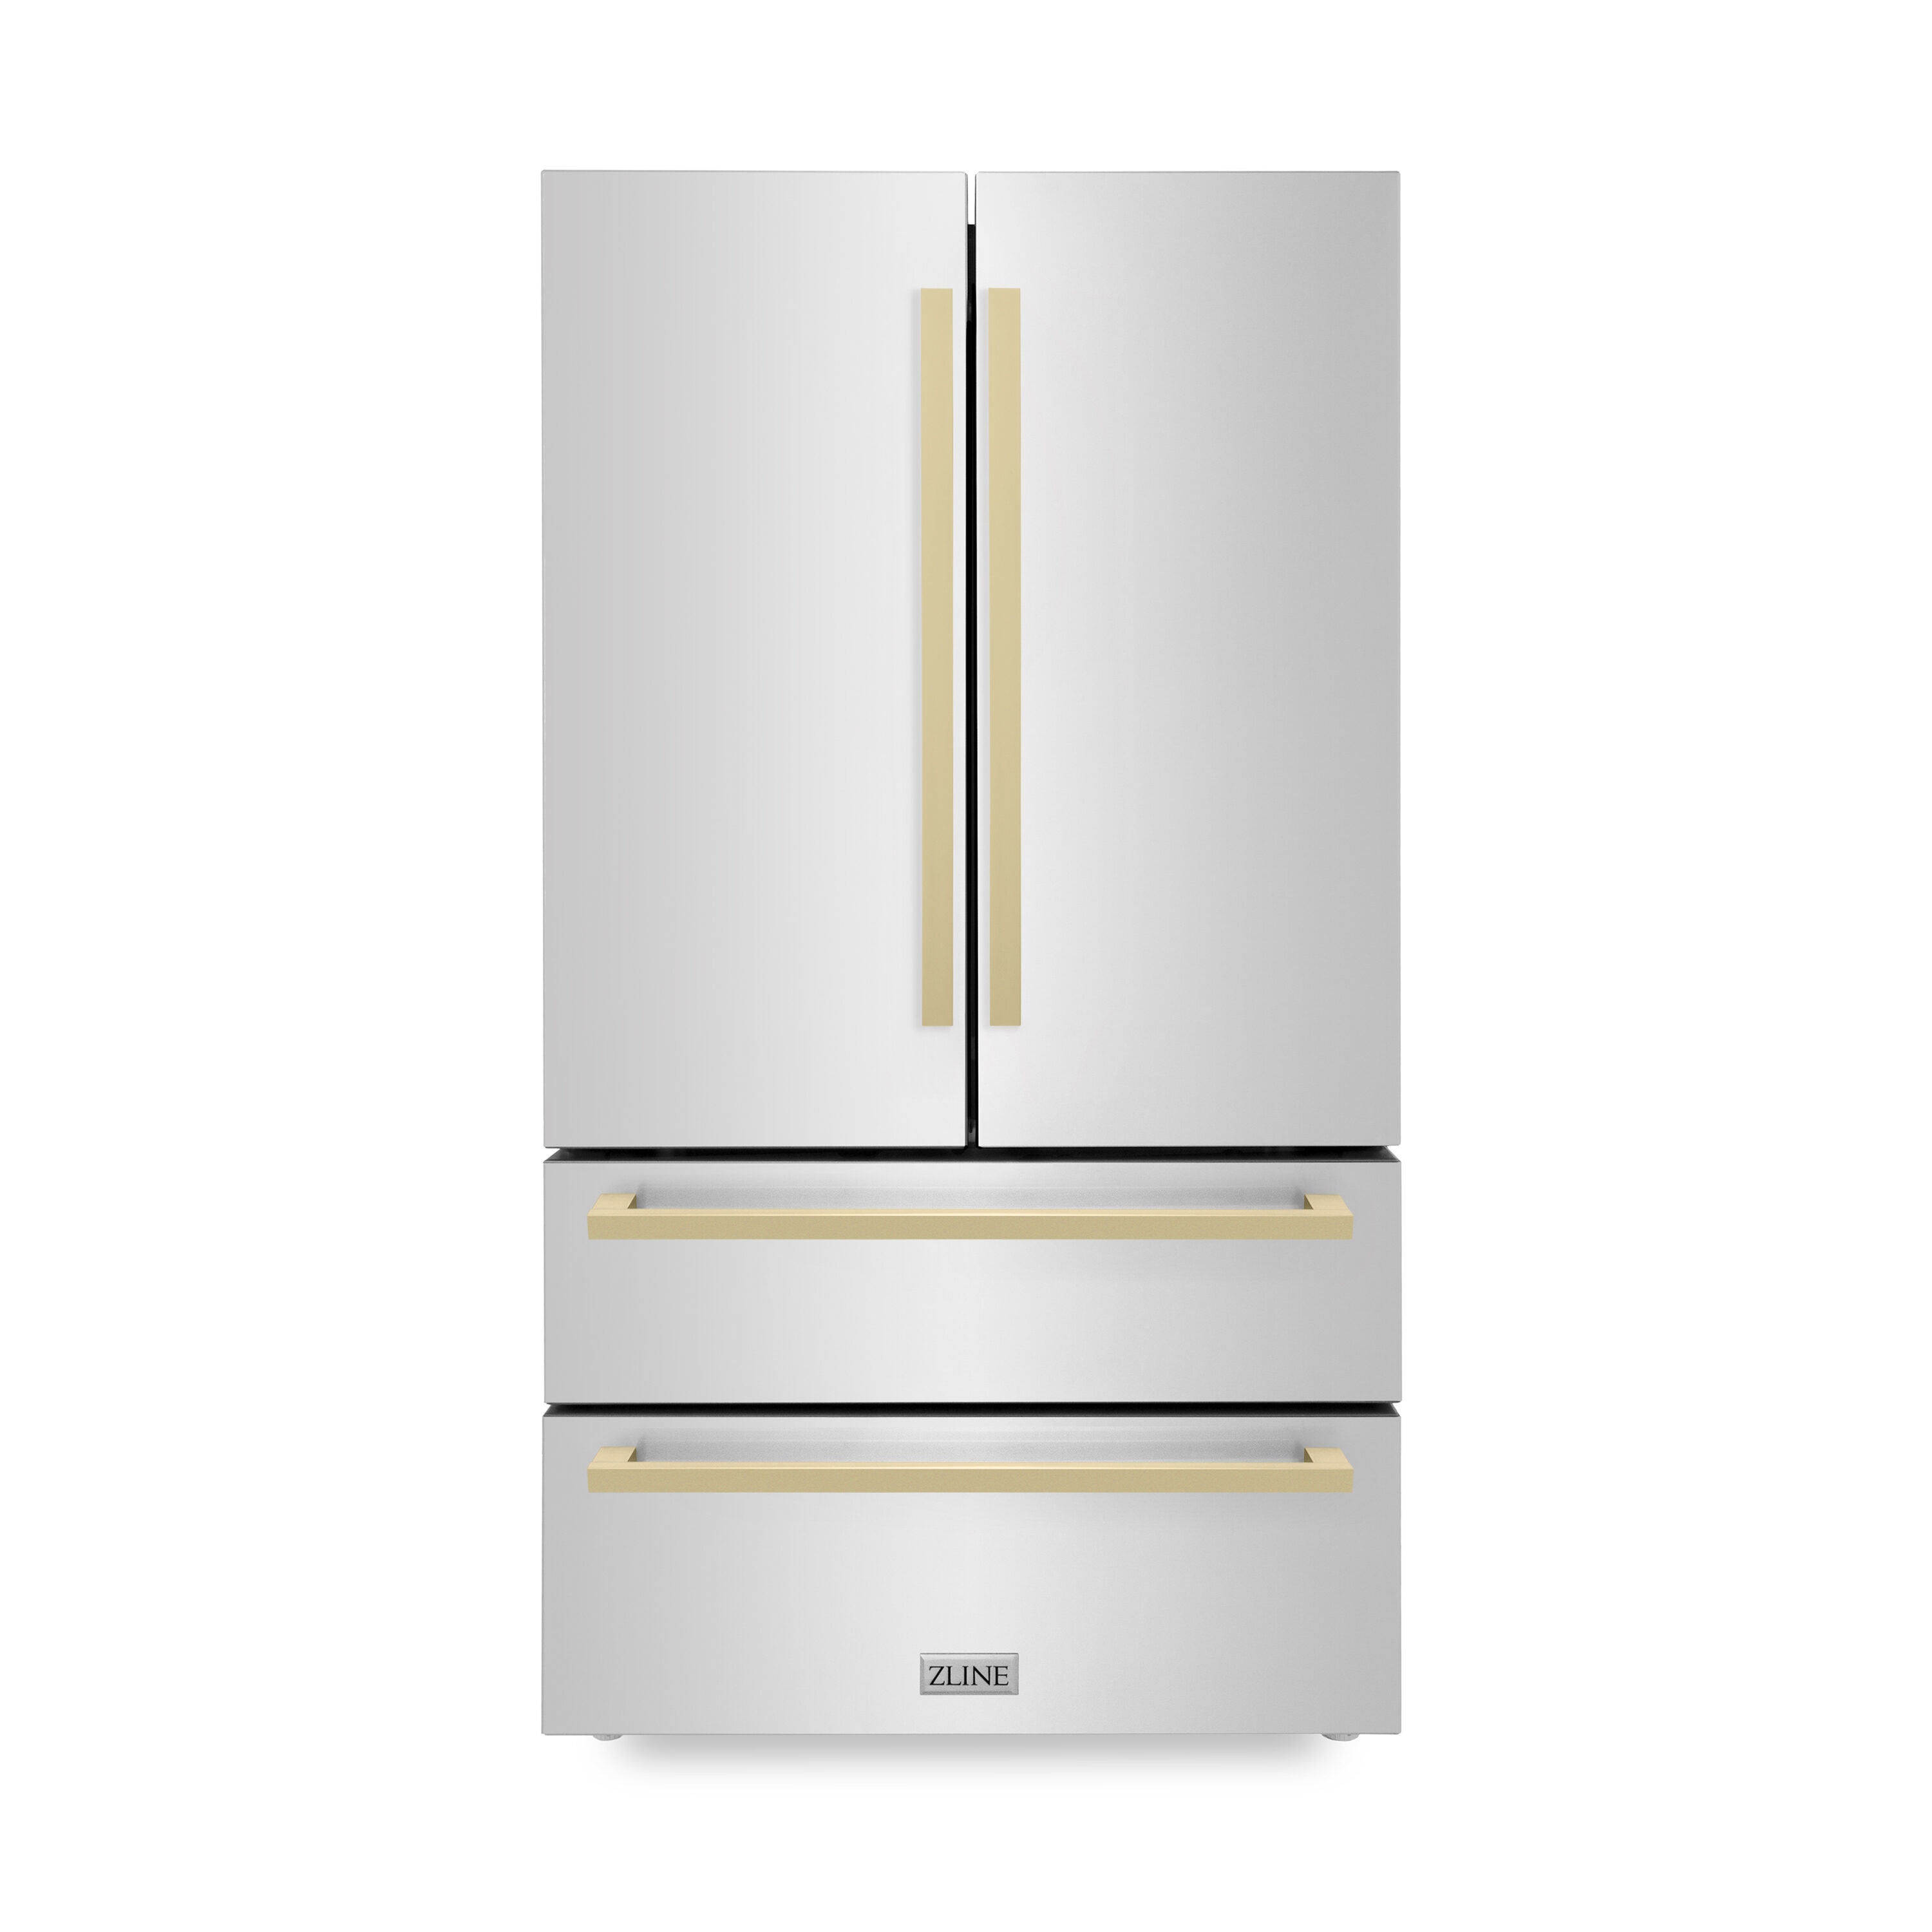 ZLINE Kitchen and Bath Autograph Edition 36 in. 4-Door French Door Refrigerator with Square Champagne Bronze Handles in Stainless Steel, Brushed 430 Stainless Steel & Champagne Bronze -  RFMZ-36-FCB